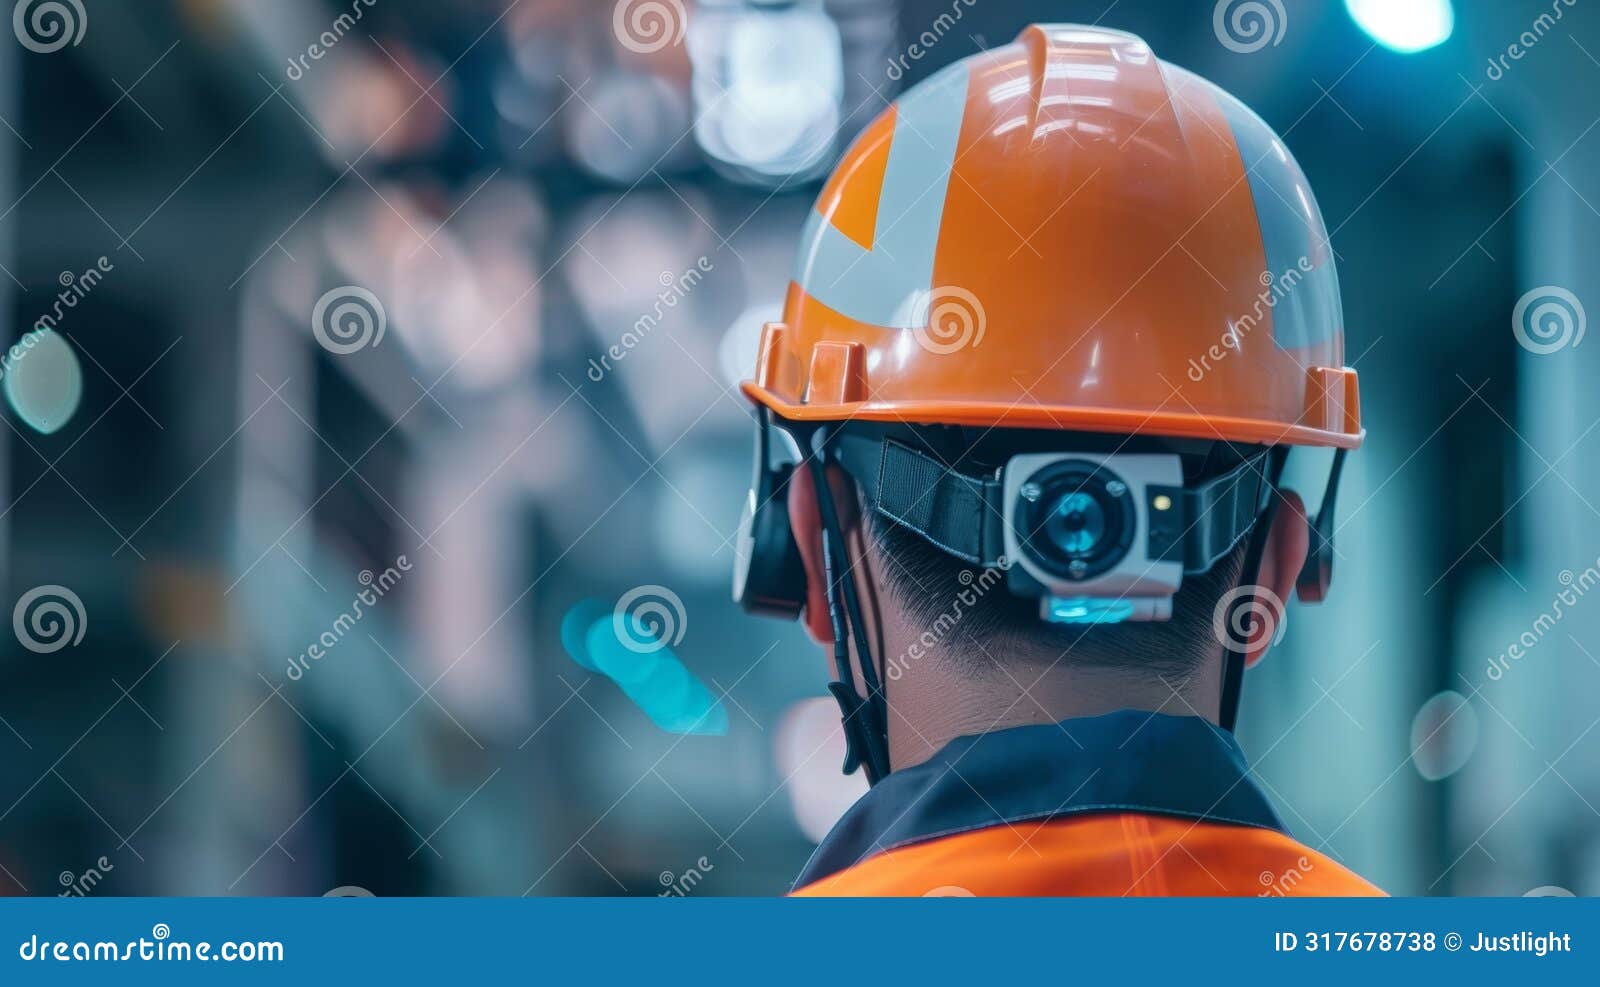 a closeup shot of a sensor attached to a workers safety helmet tracking their movements and alerting authorities in case